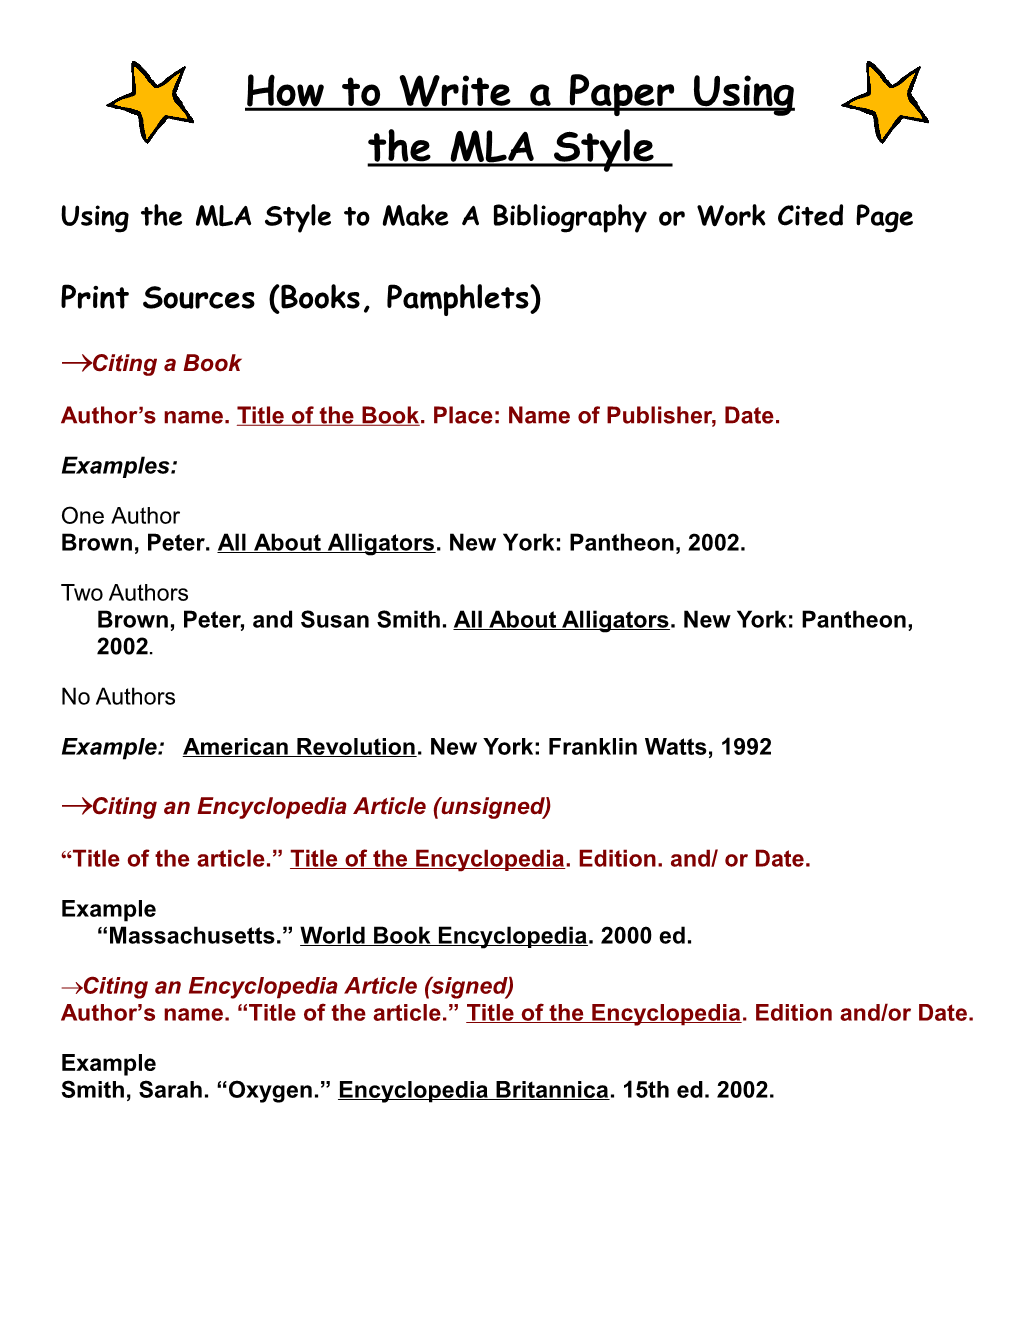 How to Write a Bibliography s2